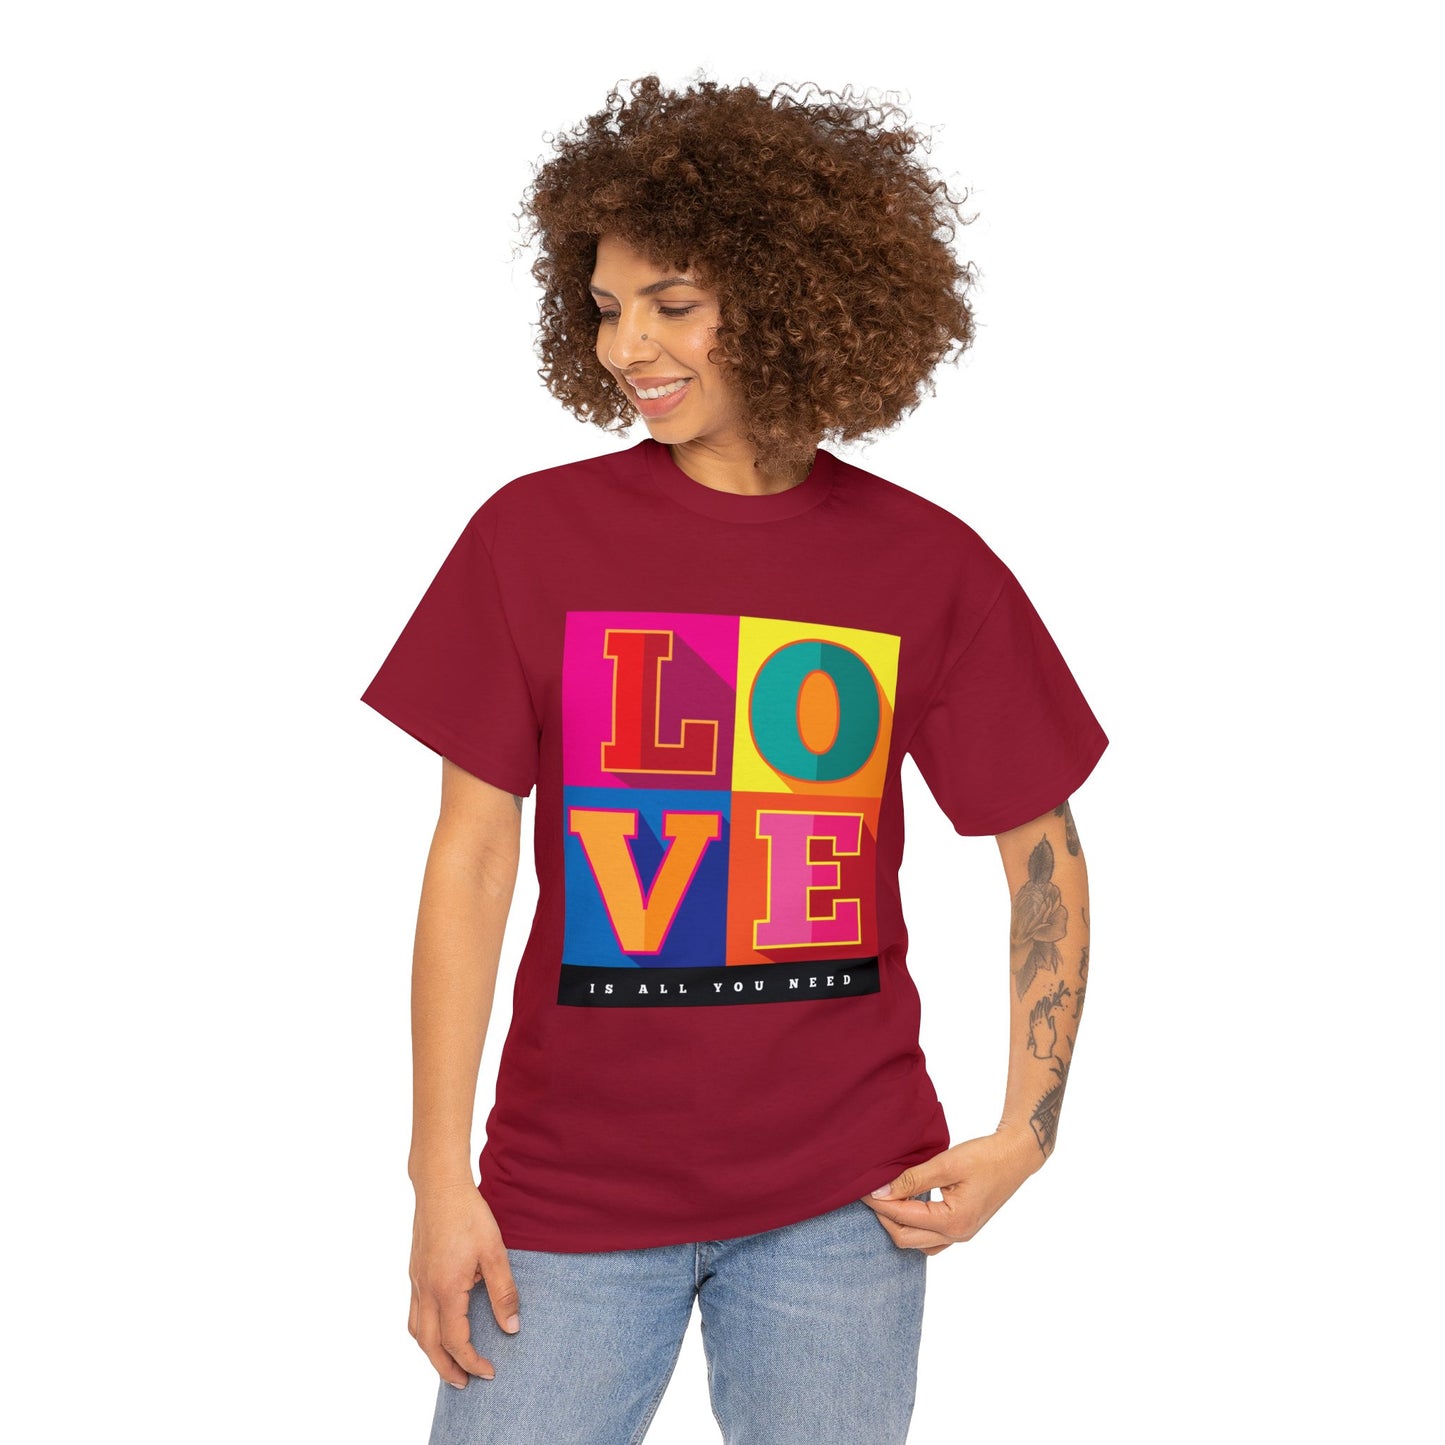 All you need is love—- Heavy Cotton Tee shirt